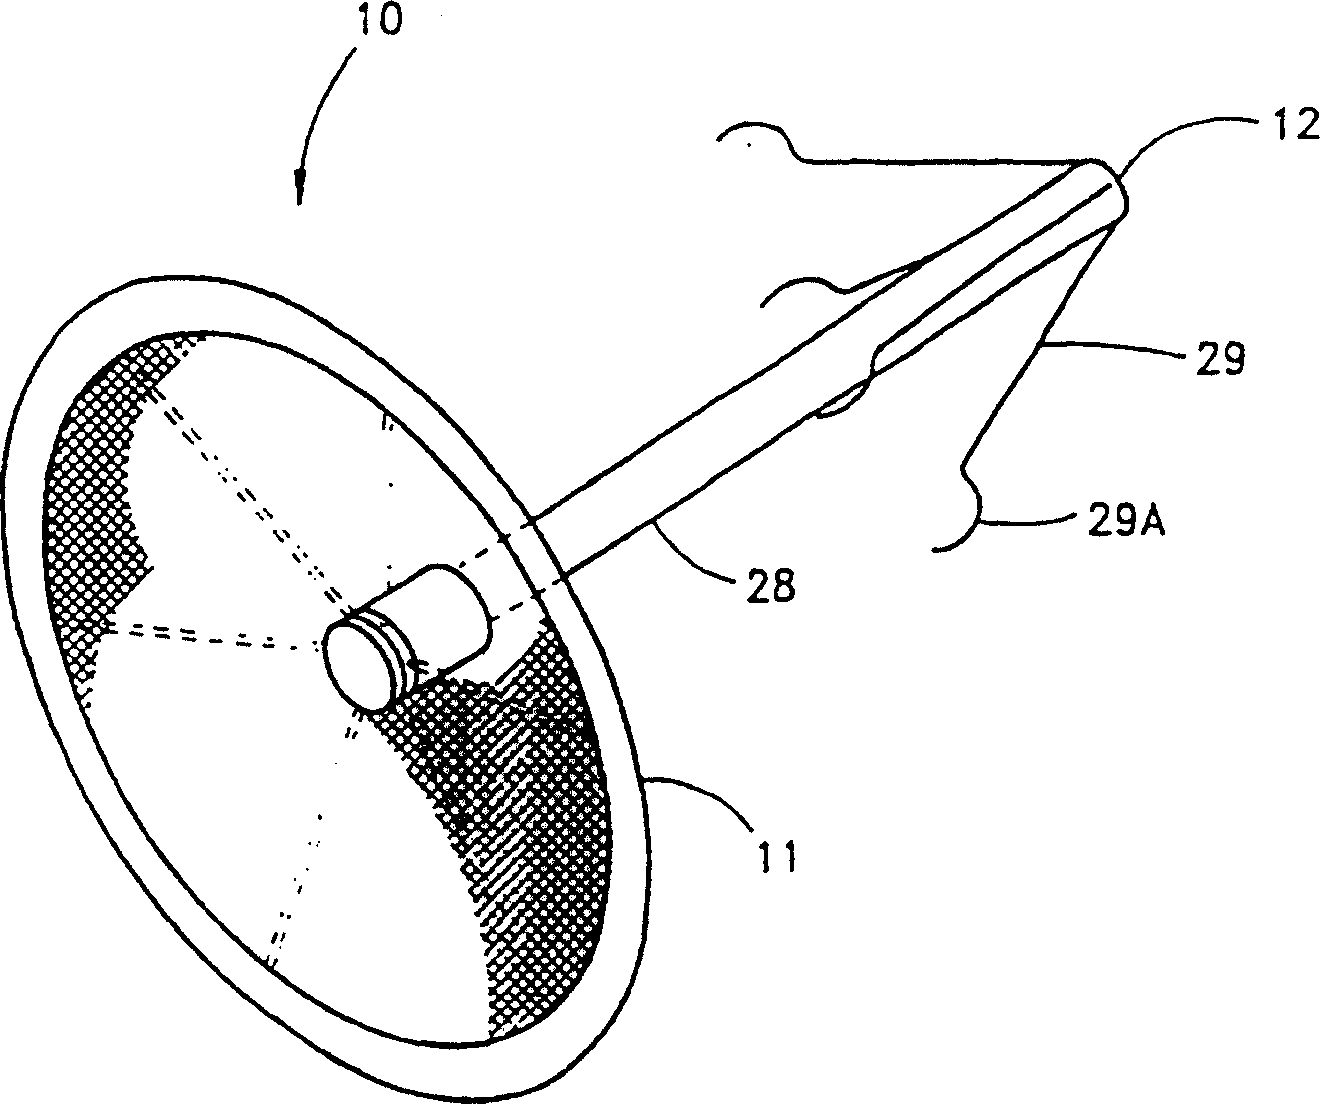 Device for left atrial appendage occlusion